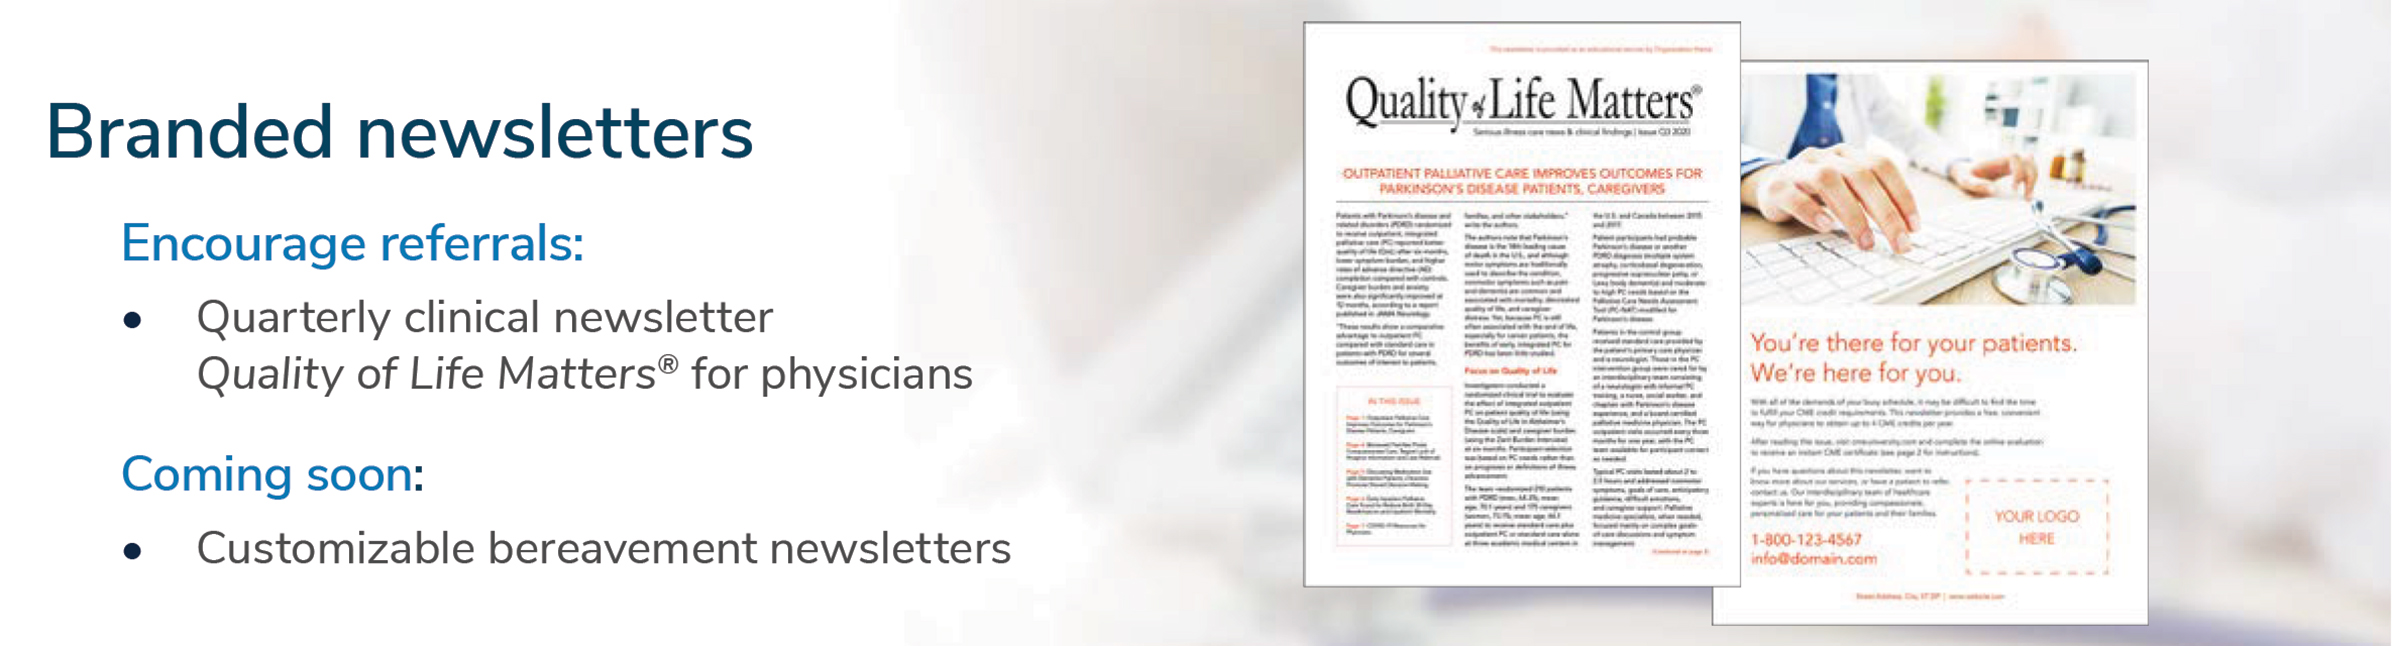 Branded newsletters: Encourage referrals: Quarterly clinical newsletter, Quality of Life Matters for Physicians. Coming soon: Customizable bereavement newsletters